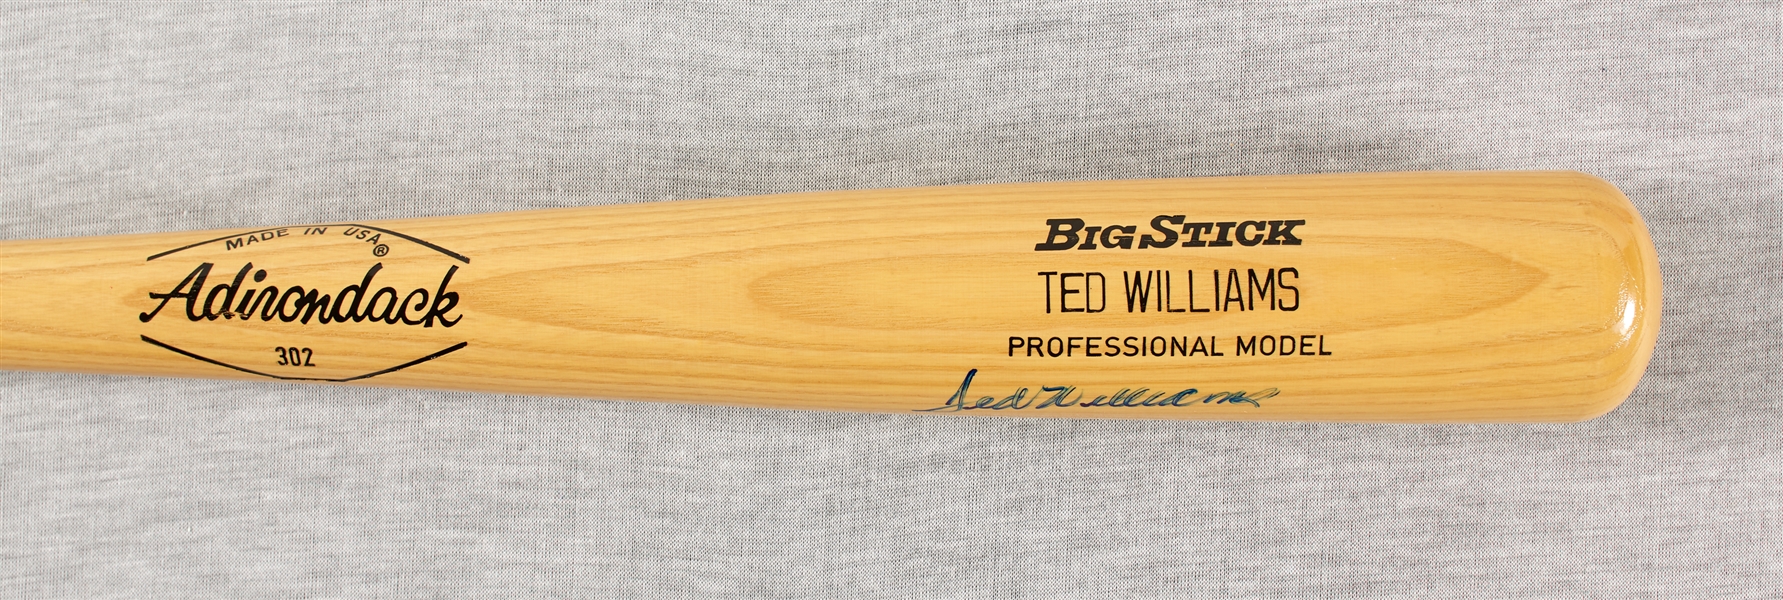 Ted Williams Signed Rawlings Bat (PSA/DNA)